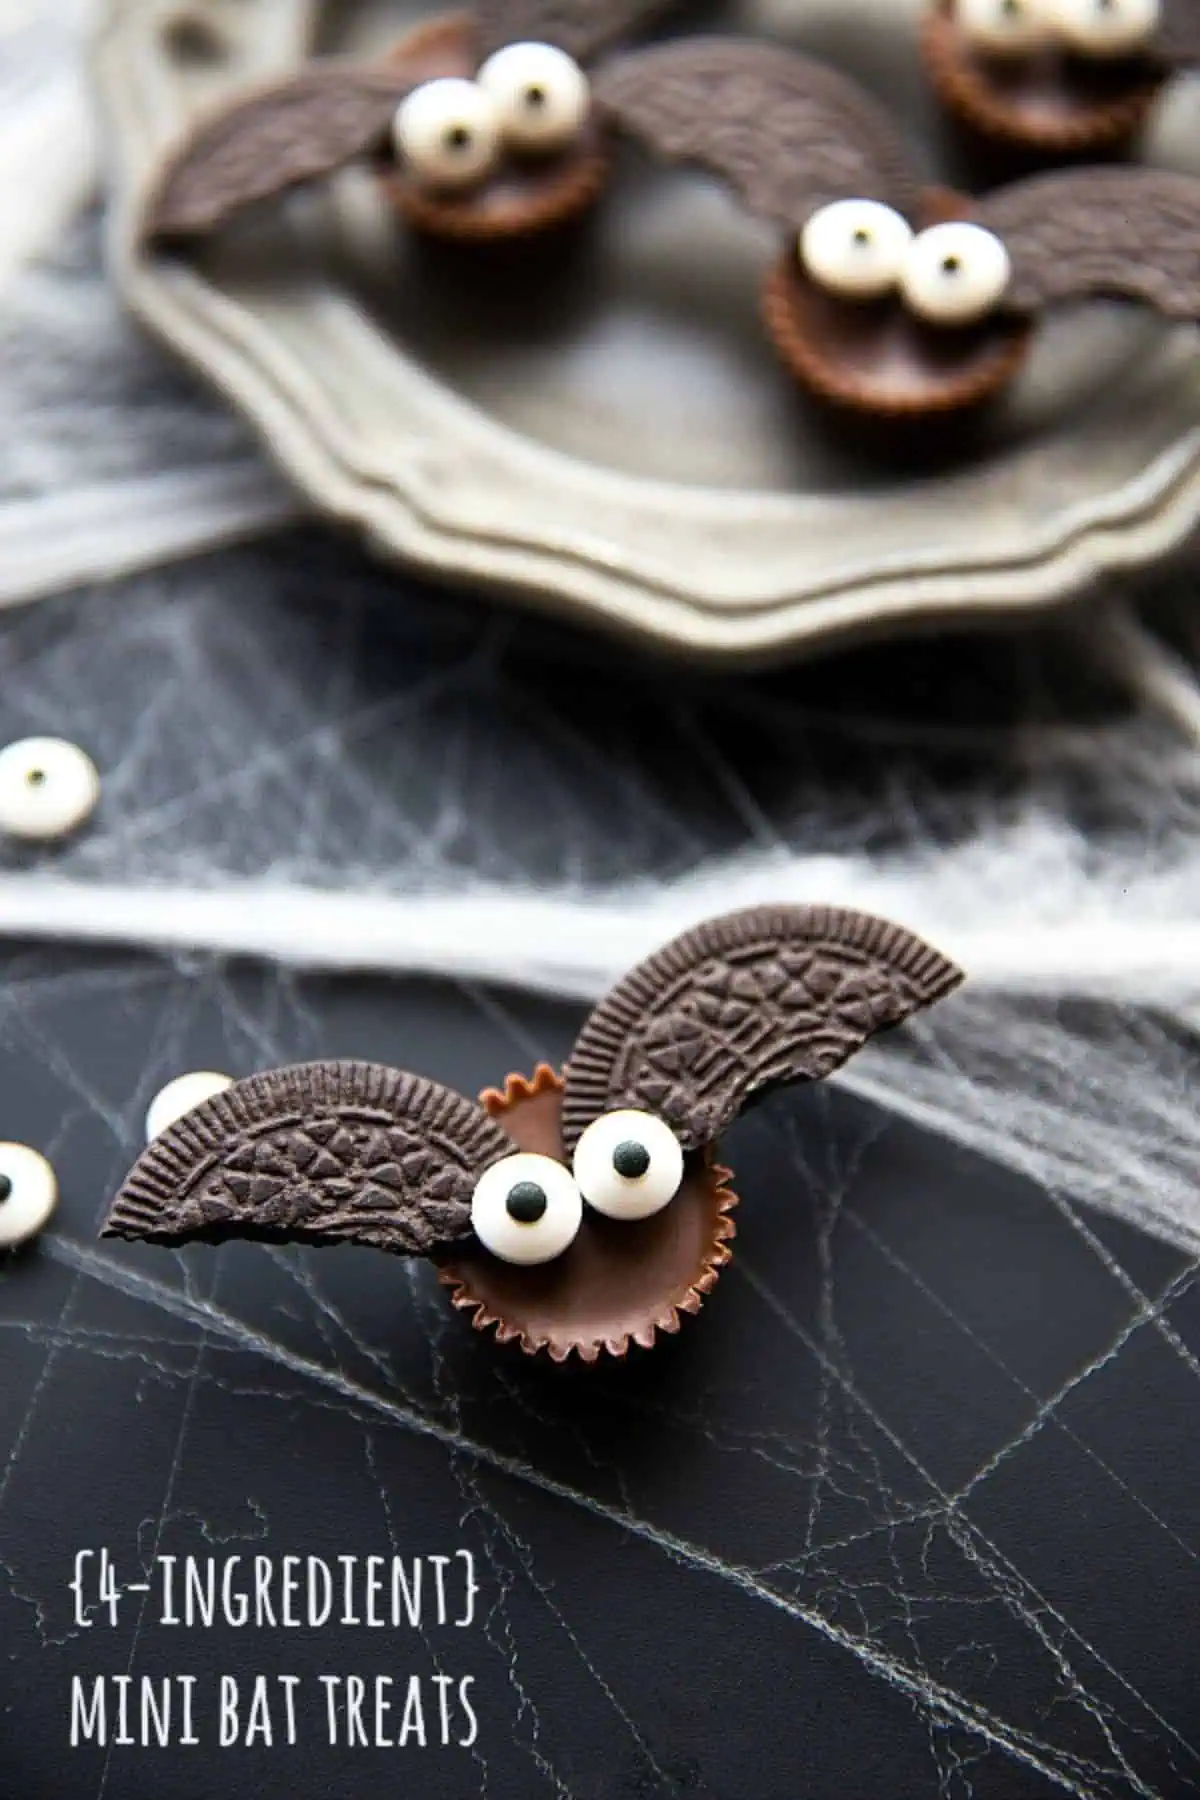 dark chocolate peanut butter cups turned into bats for an adorable fall or halloween themed treat or snack